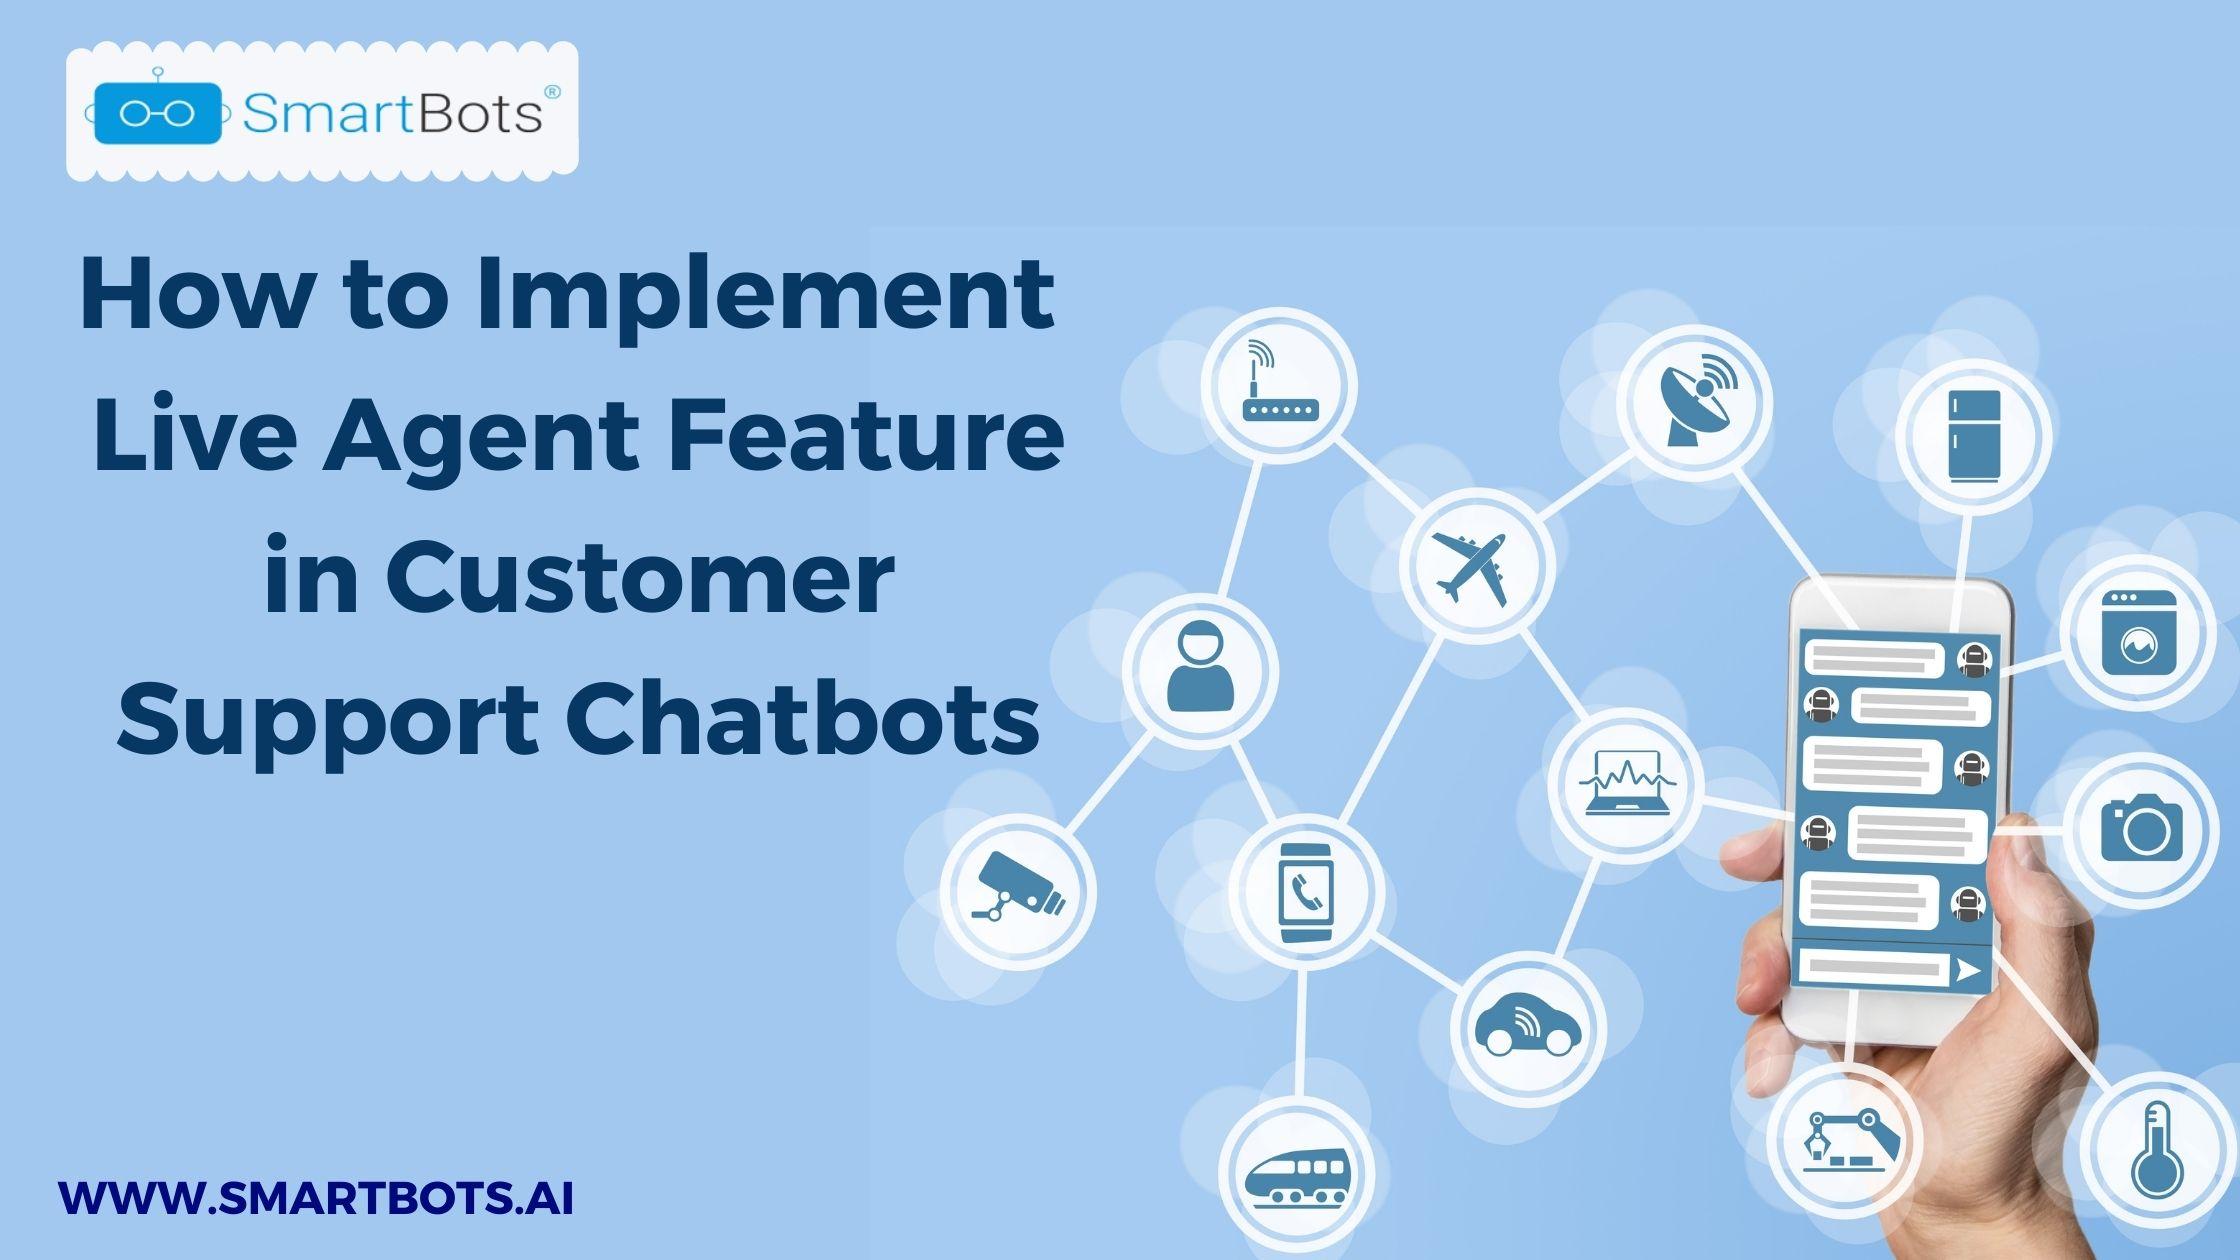 Product How to Implement Live Agent Feature in Customer Support Chatbots - SmartBots image